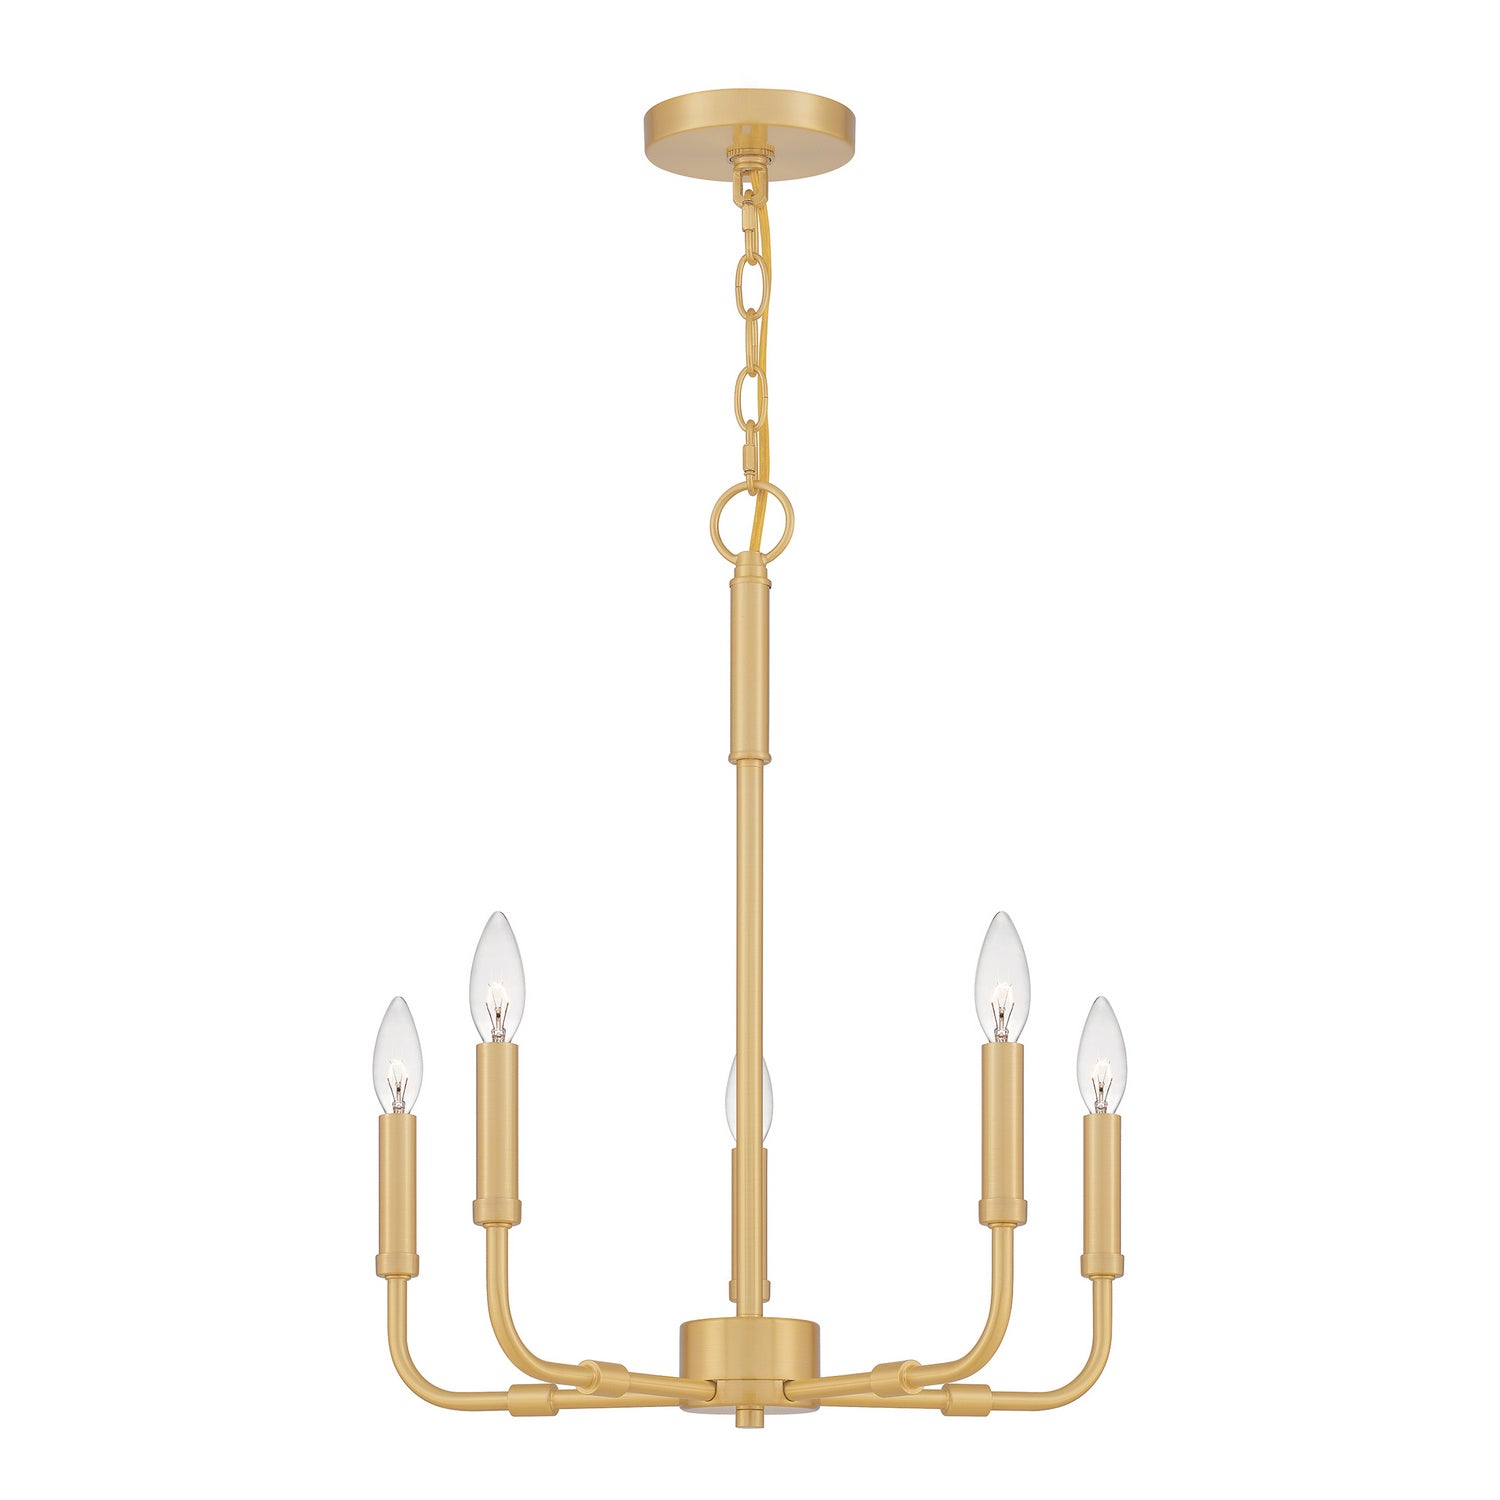 Abner Five Light Chandelier by Quoizel in Aged Brass Finish (ABR5018AB)